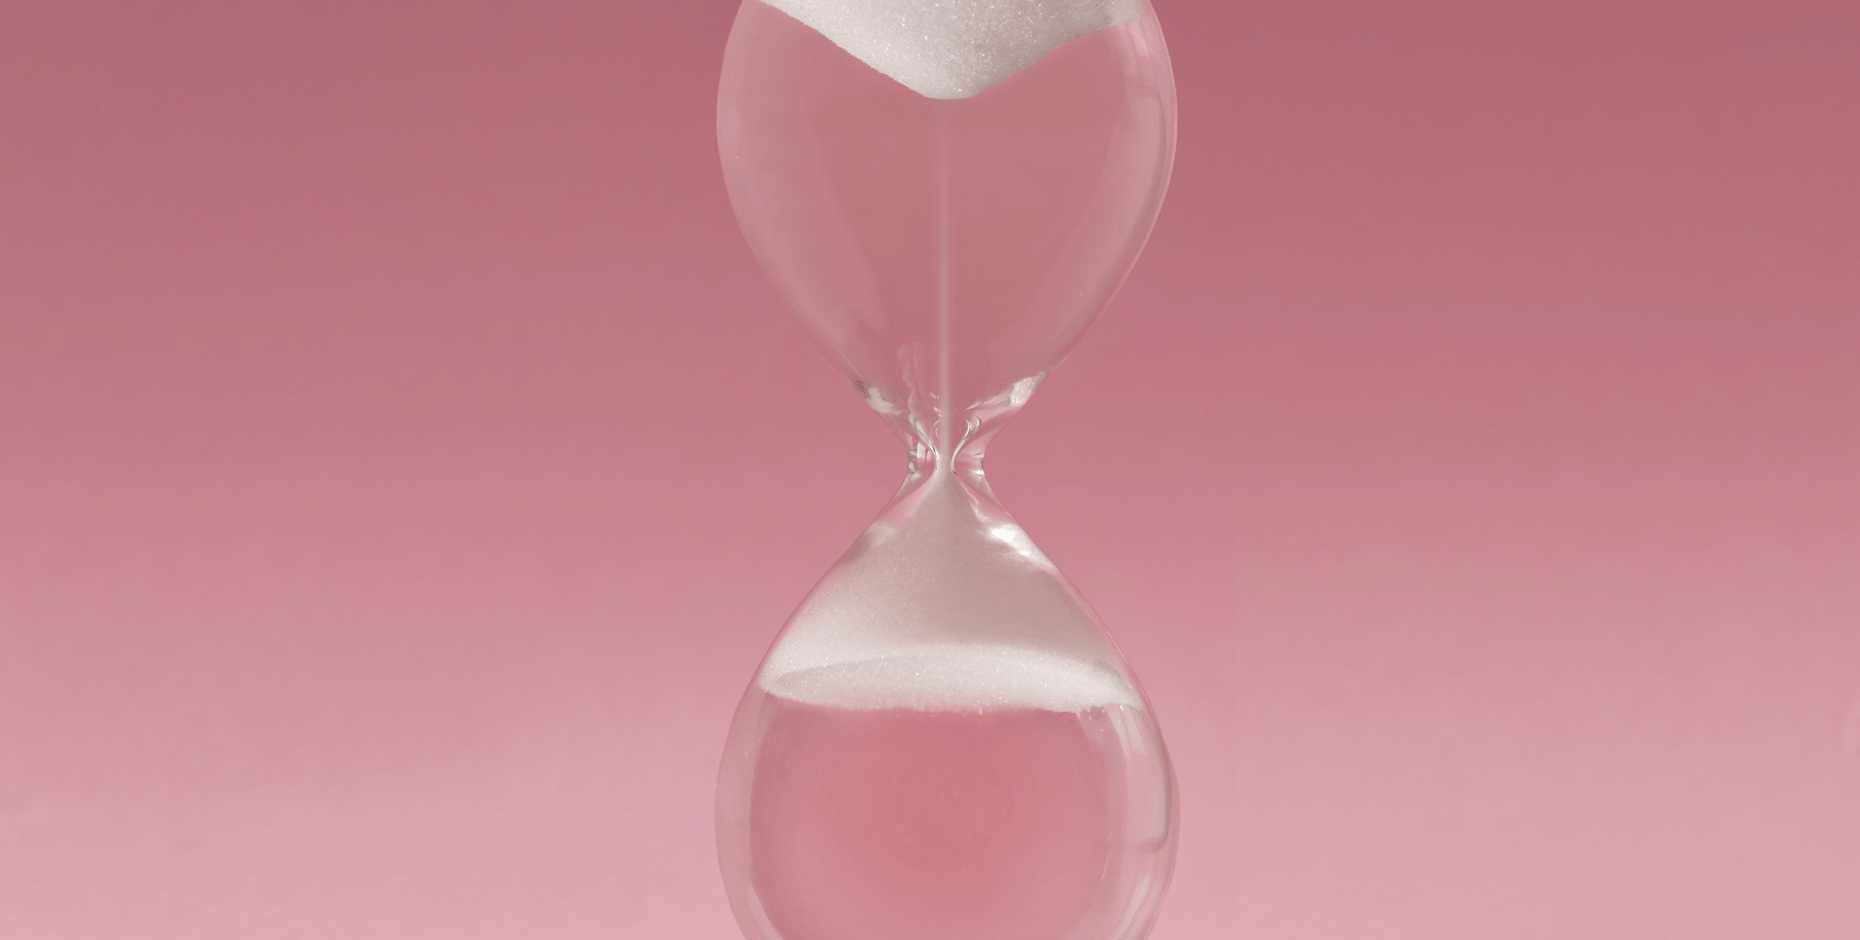 Hourglass on a soft pink background